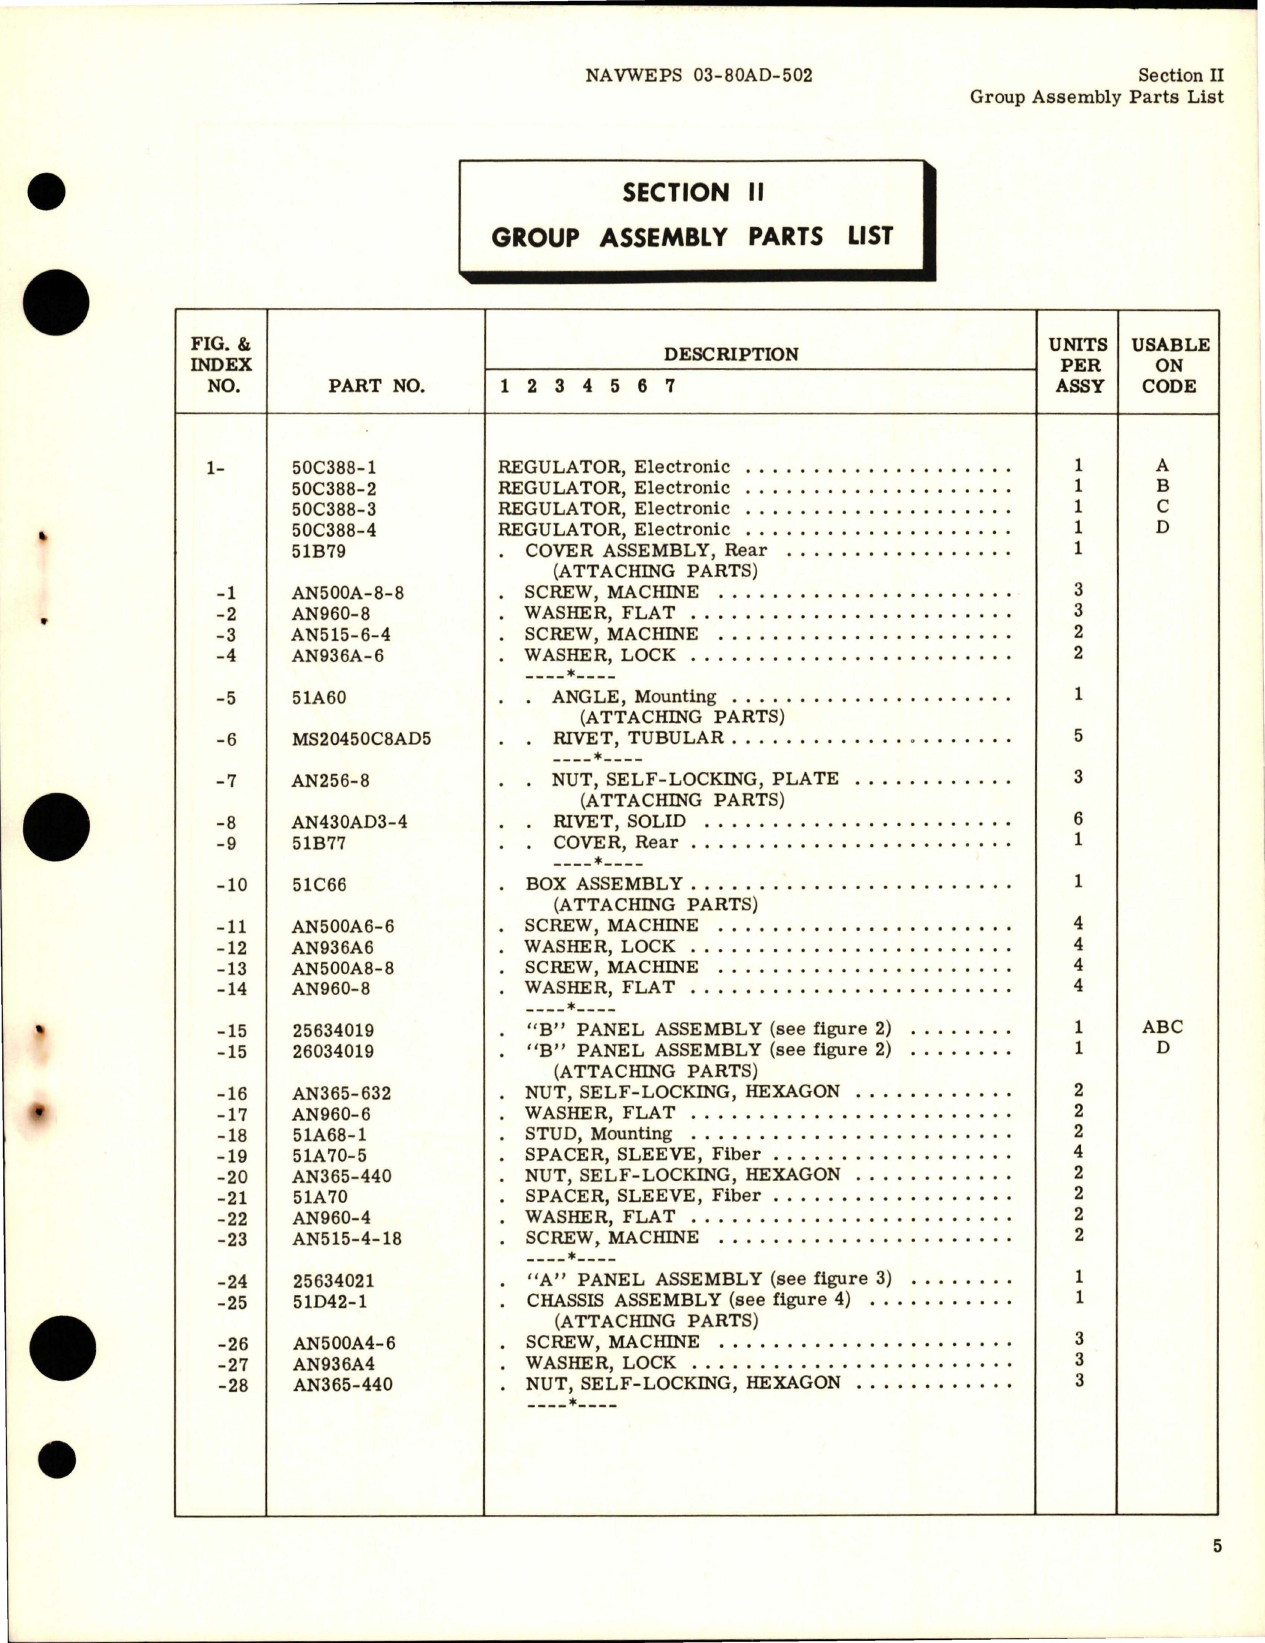 Sample page 7 from AirCorps Library document: Illustrated Parts Breakdown for Electronic Regulator